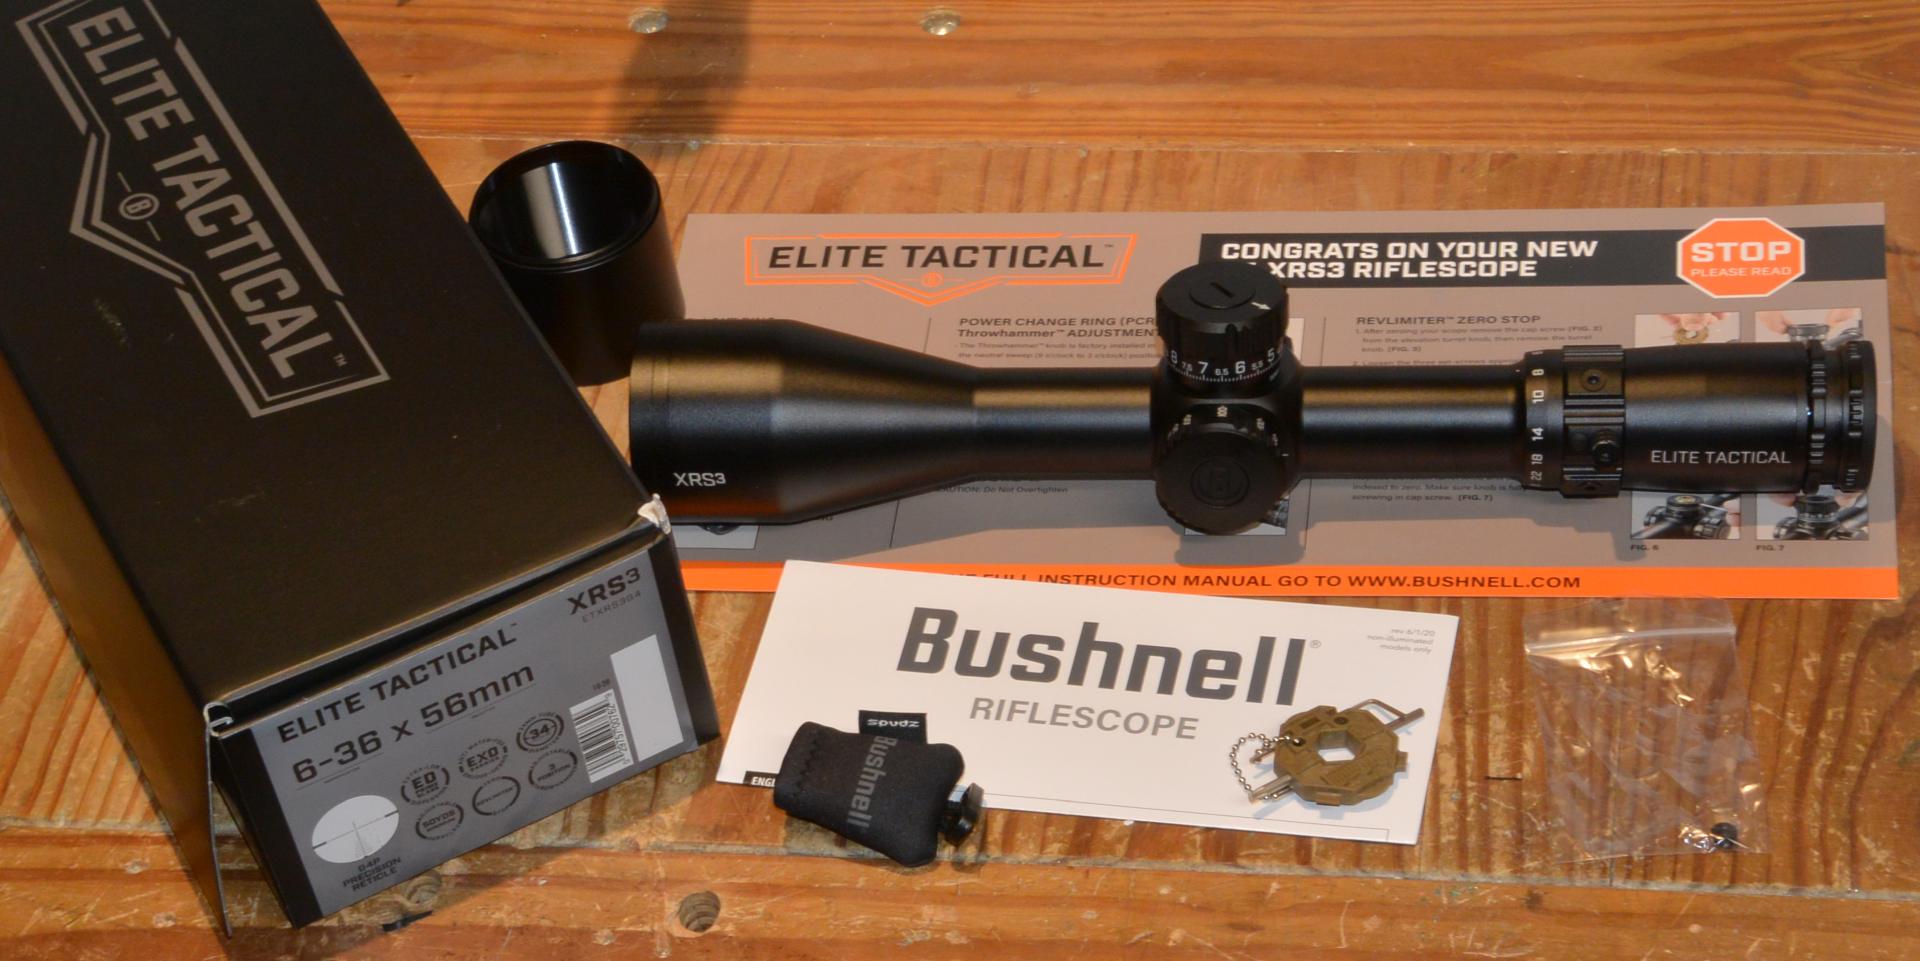 Bushnell Elite Tactical XRS3 6-36x56mm unboxing. Extras included with the scope are a short sunshade, lens cloth, keychain tool, and removable throw lever.